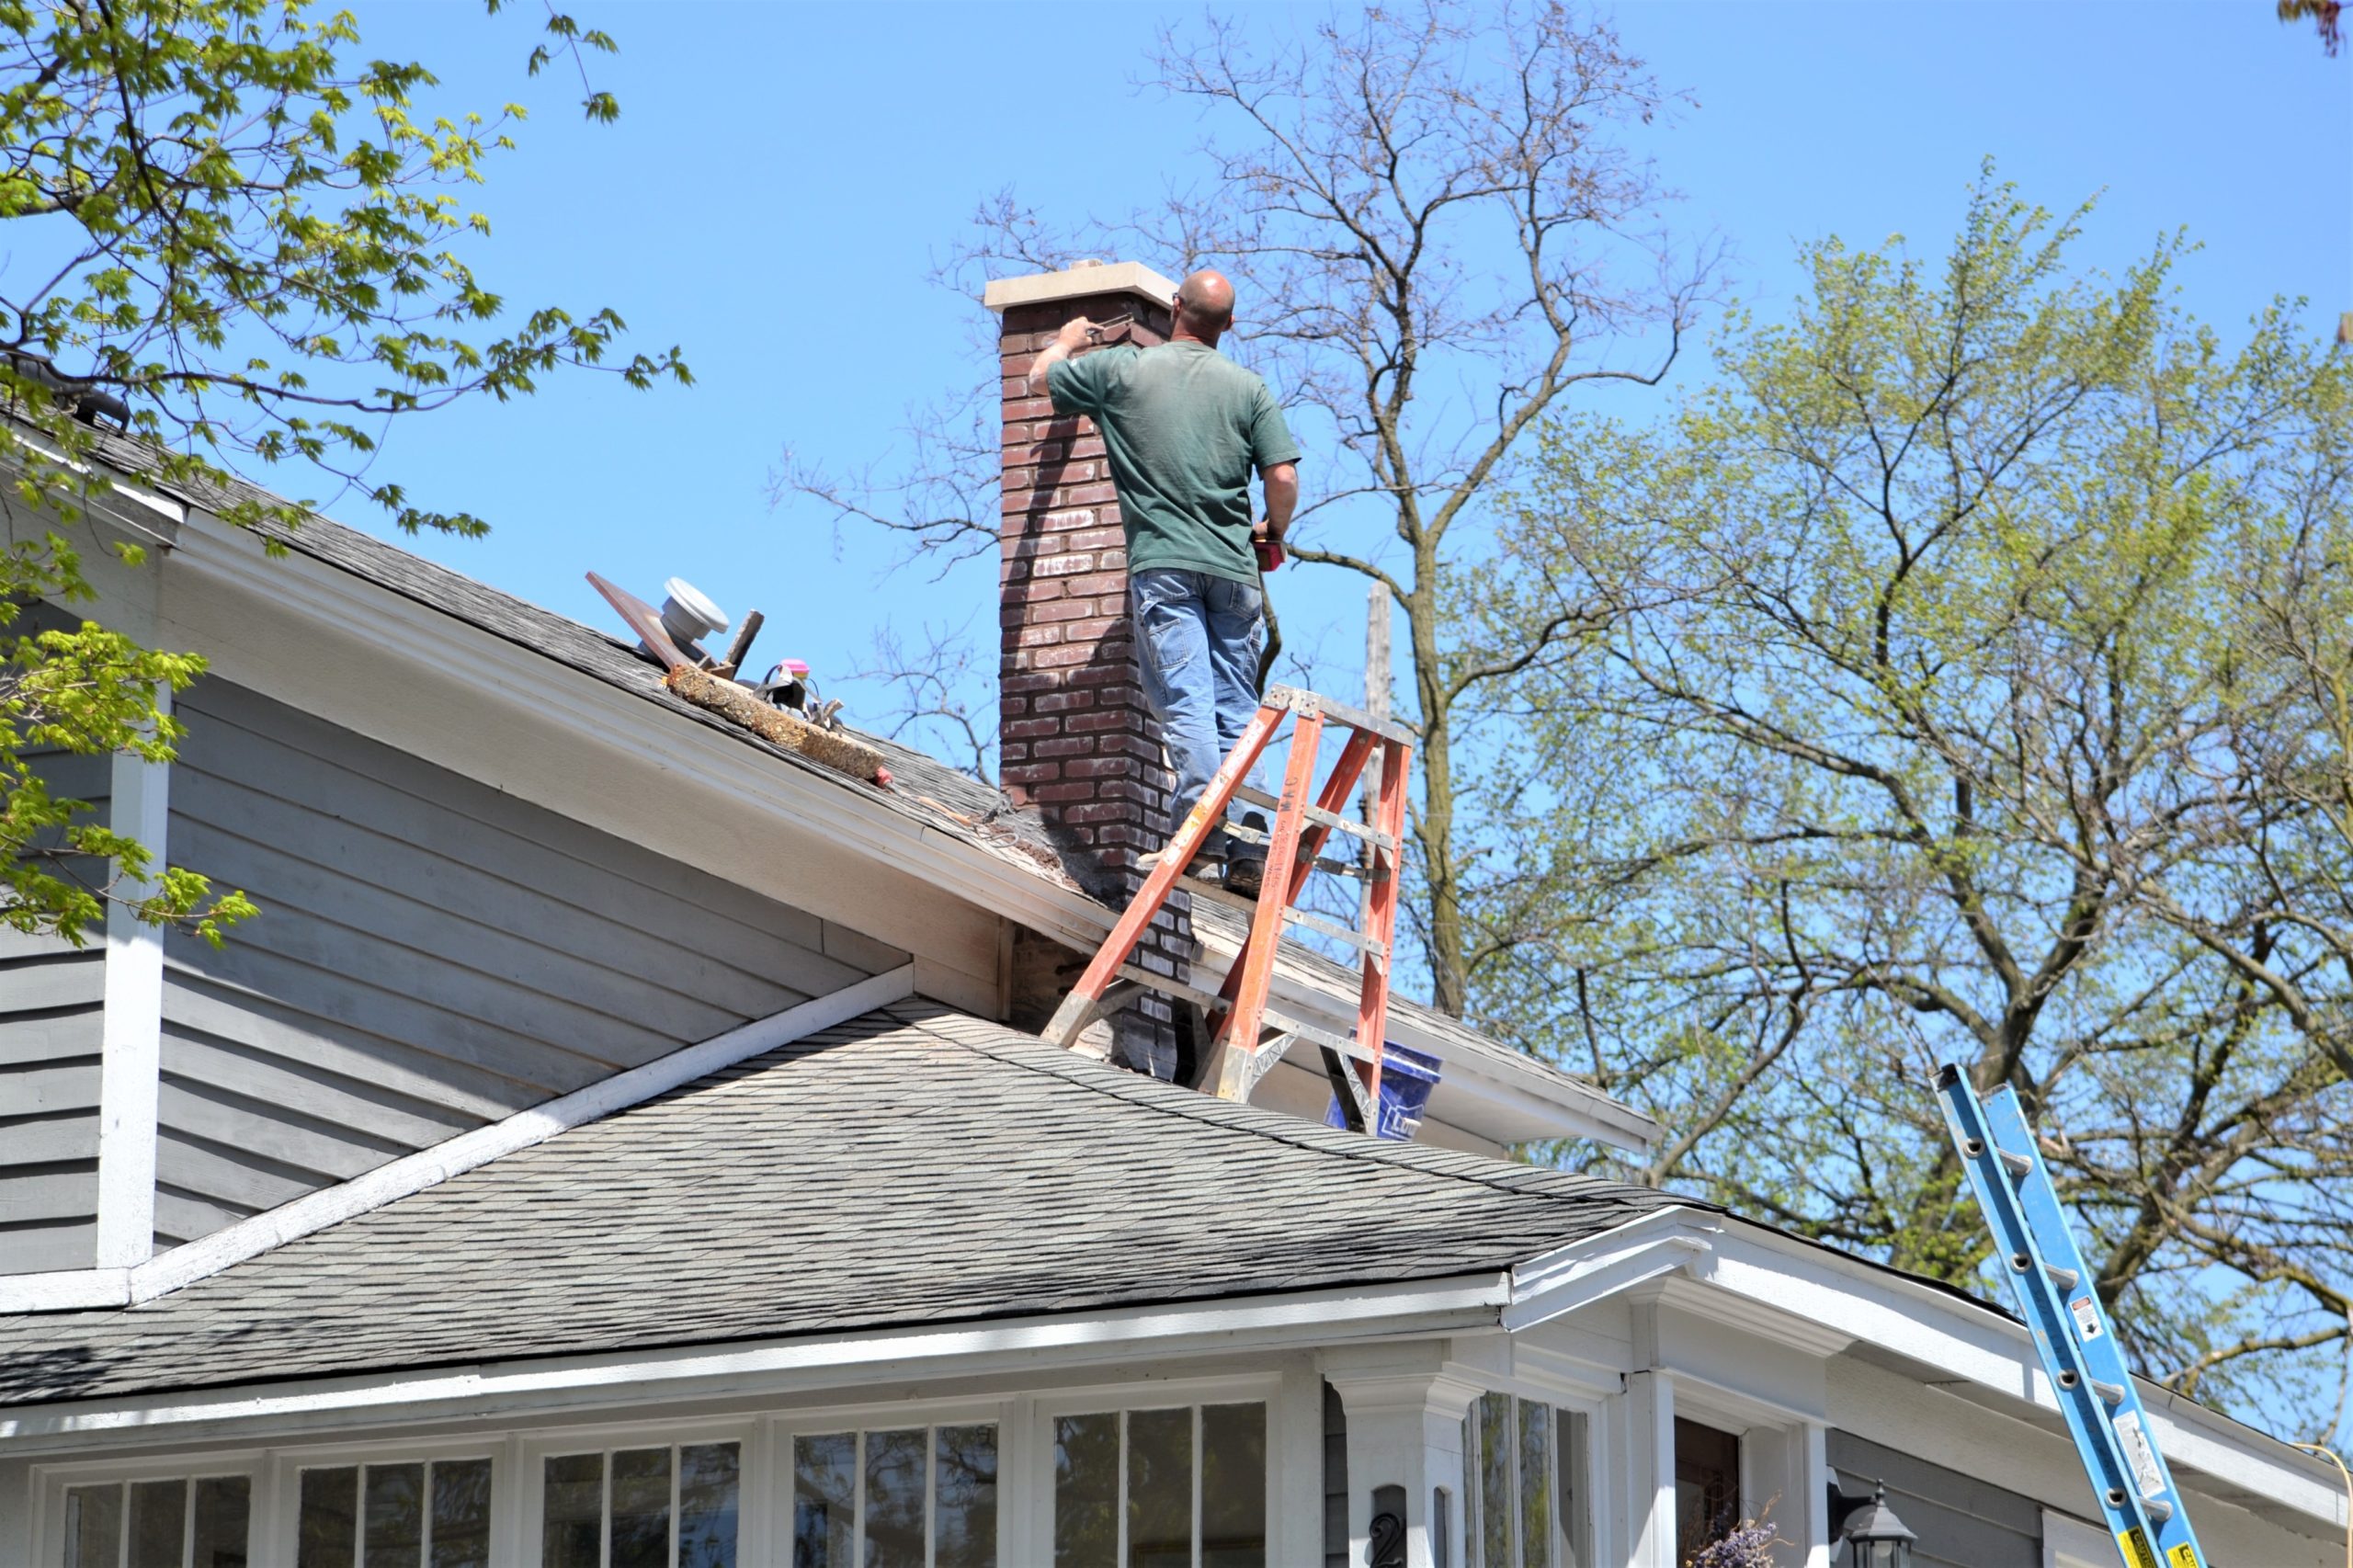 Man doing work on chimney with a ladder